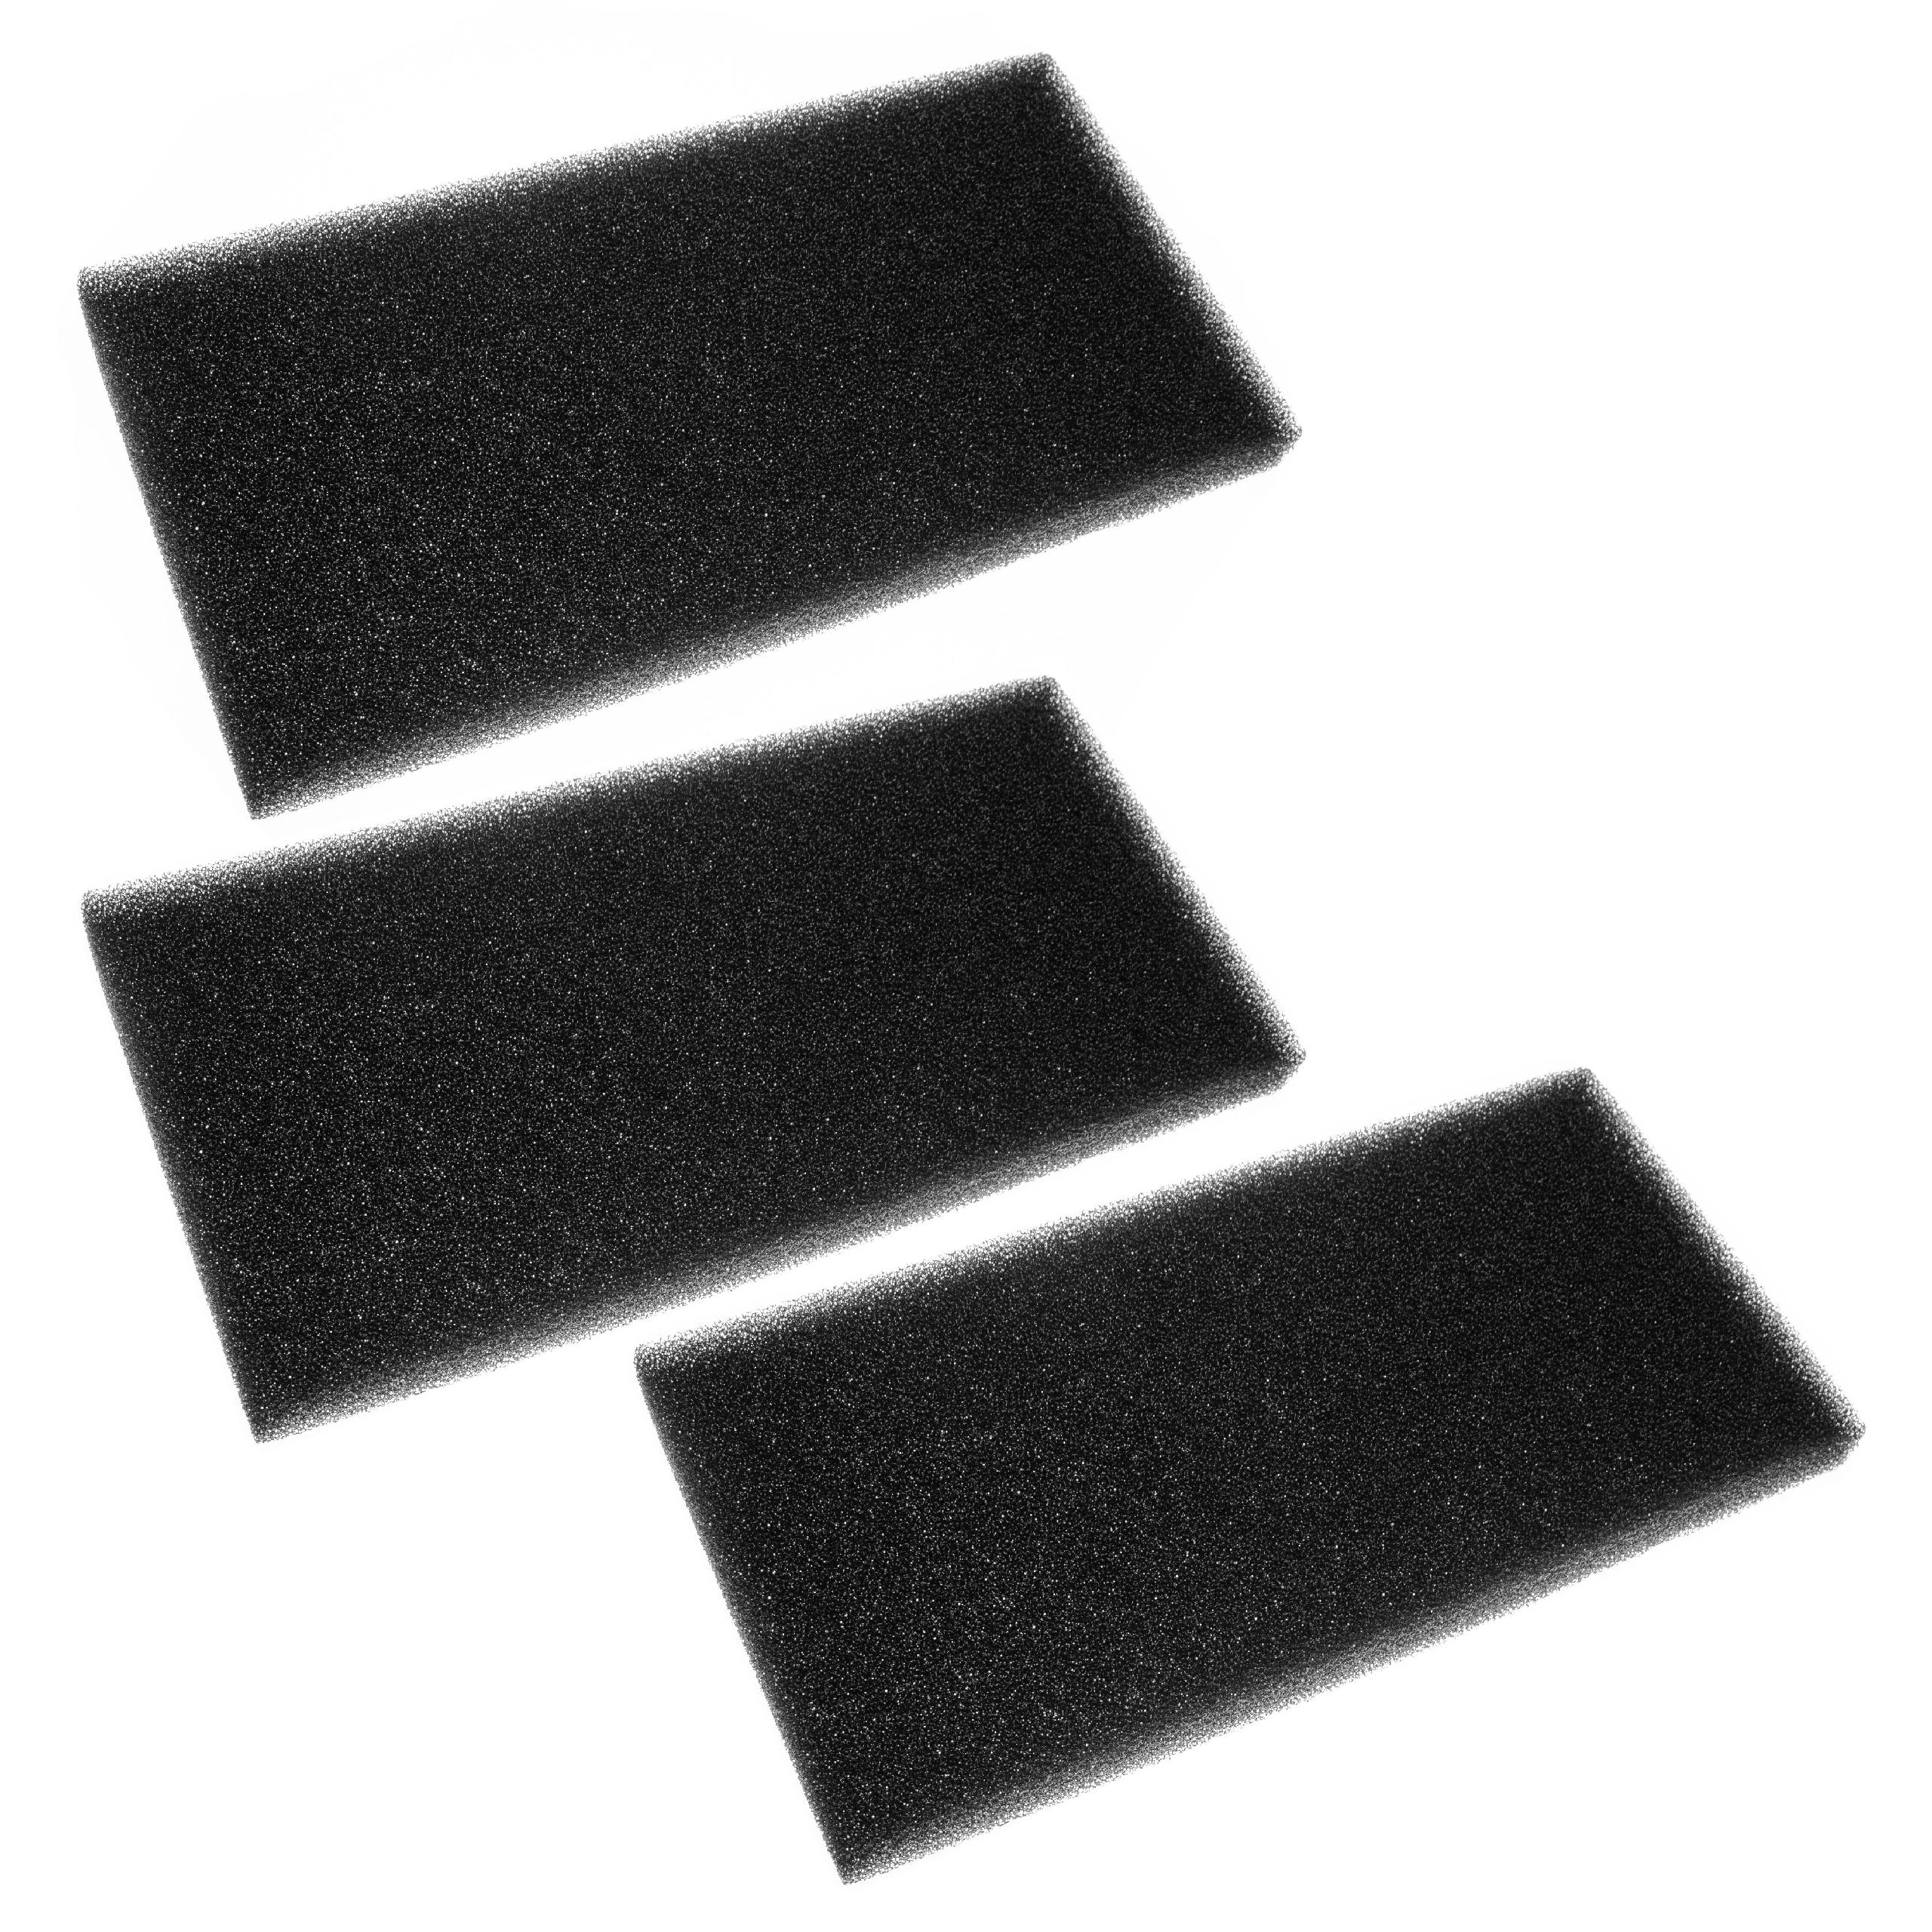 Filter Set (3x foam filter) as Replacement for Gorenje/Panasonic ANH-628504, ANH-810183 Tumble Dryer etc.